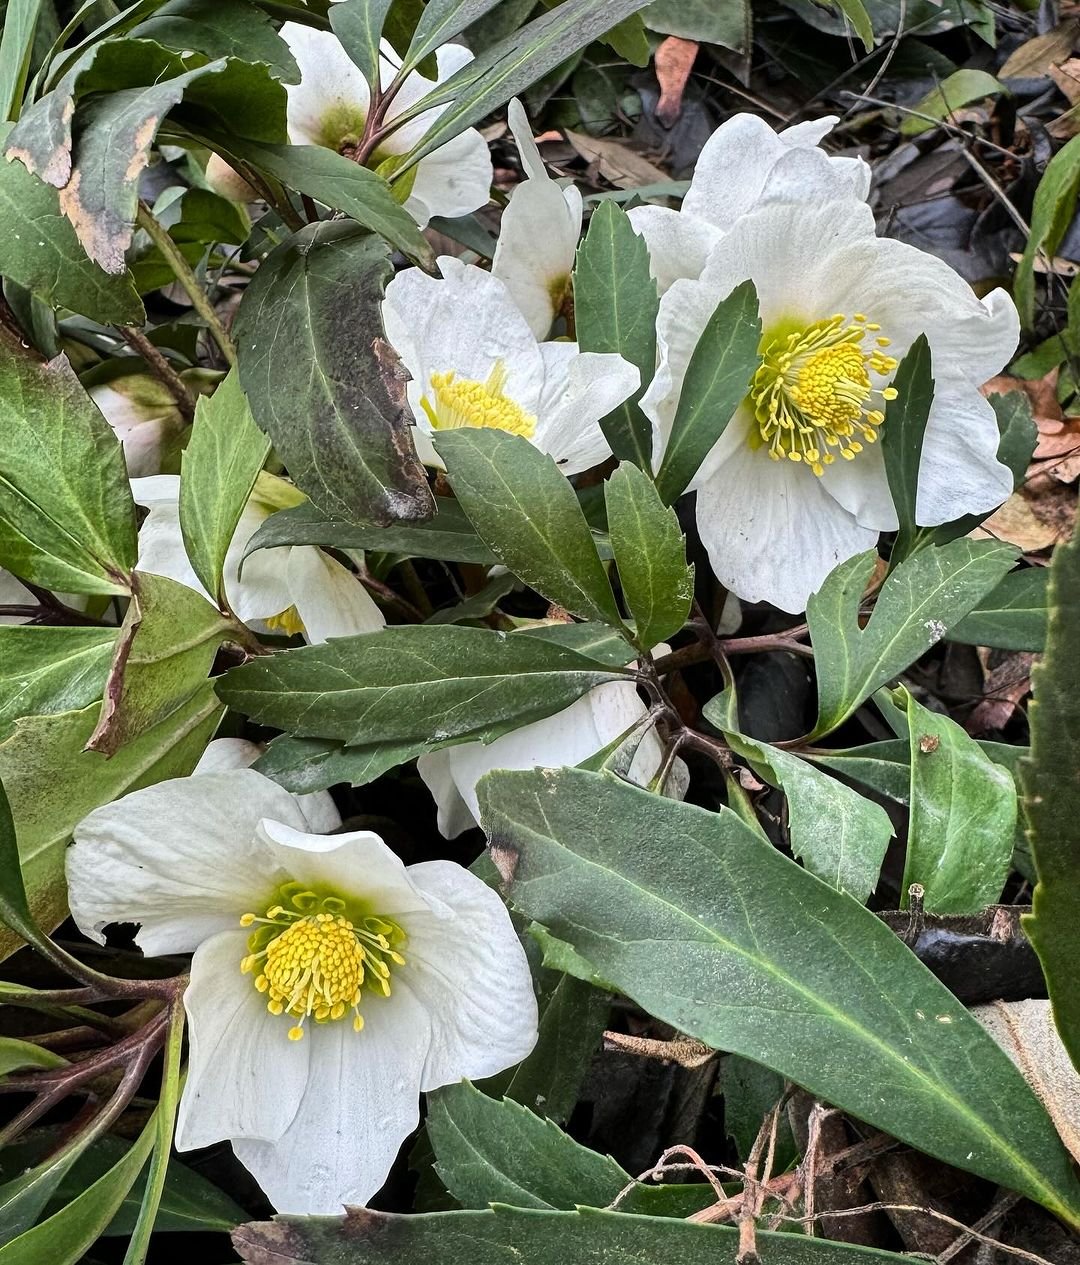 White Hellebore flowers with yellow centers blooming in the ground, creating a serene and elegant display.

